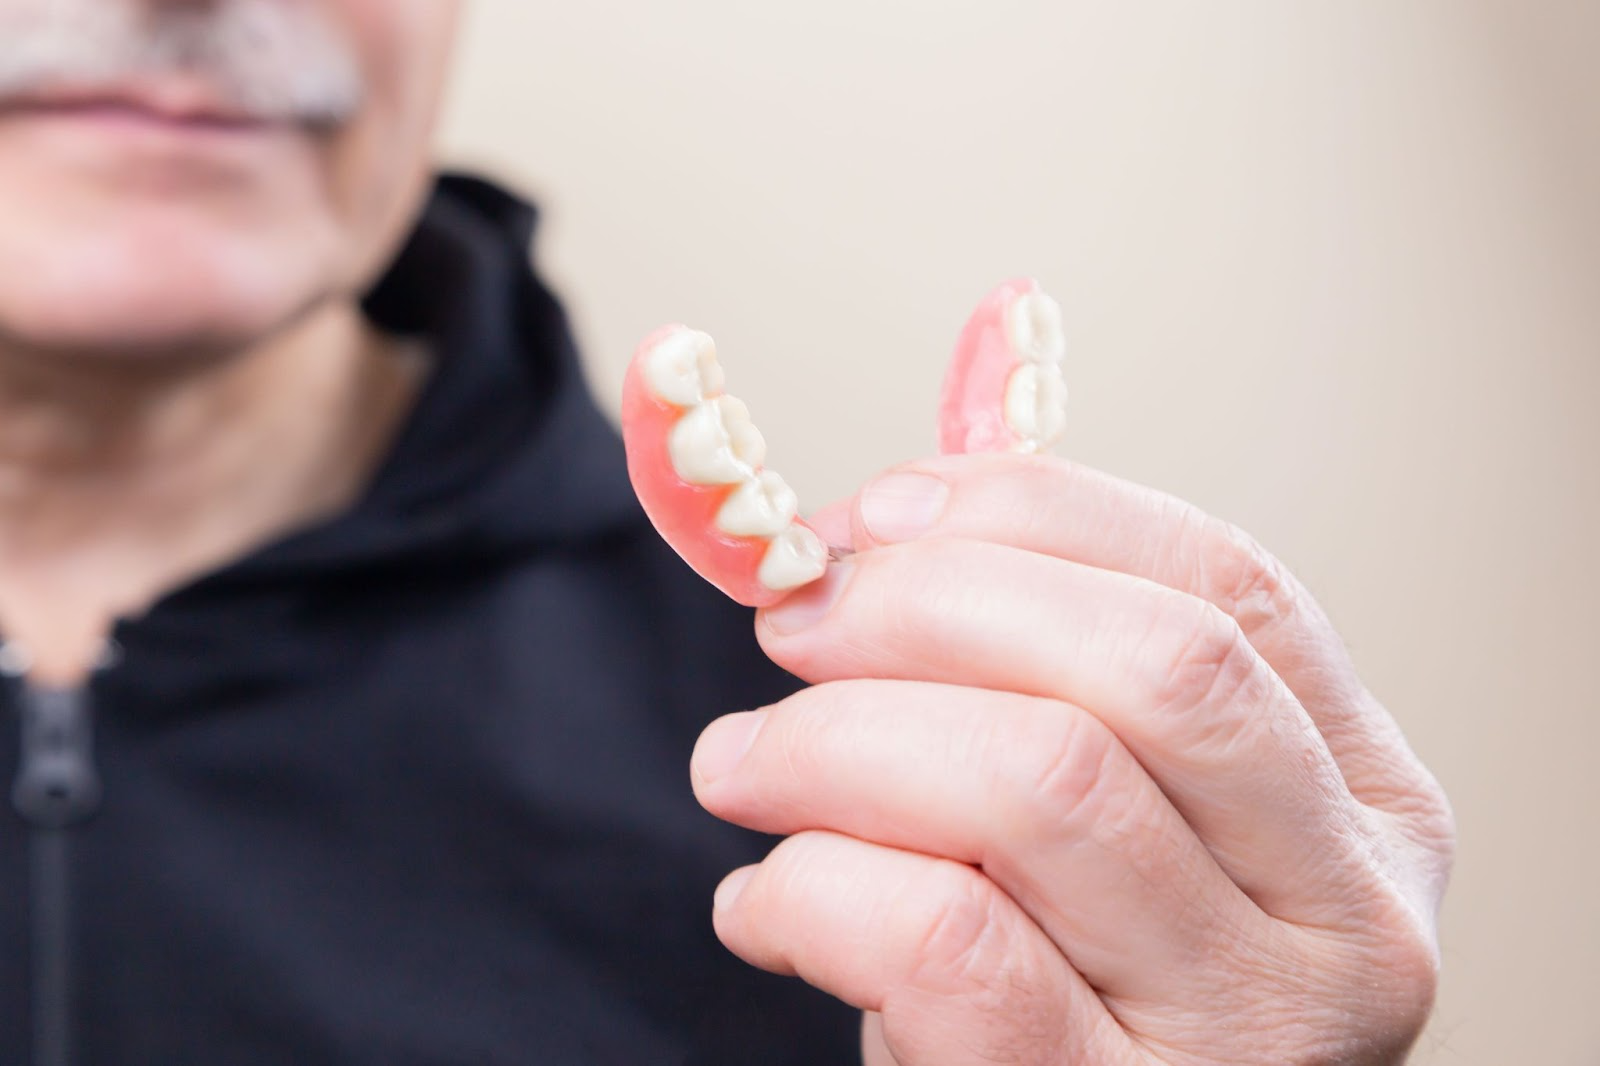 Considering dentures? Here’s what you should know.